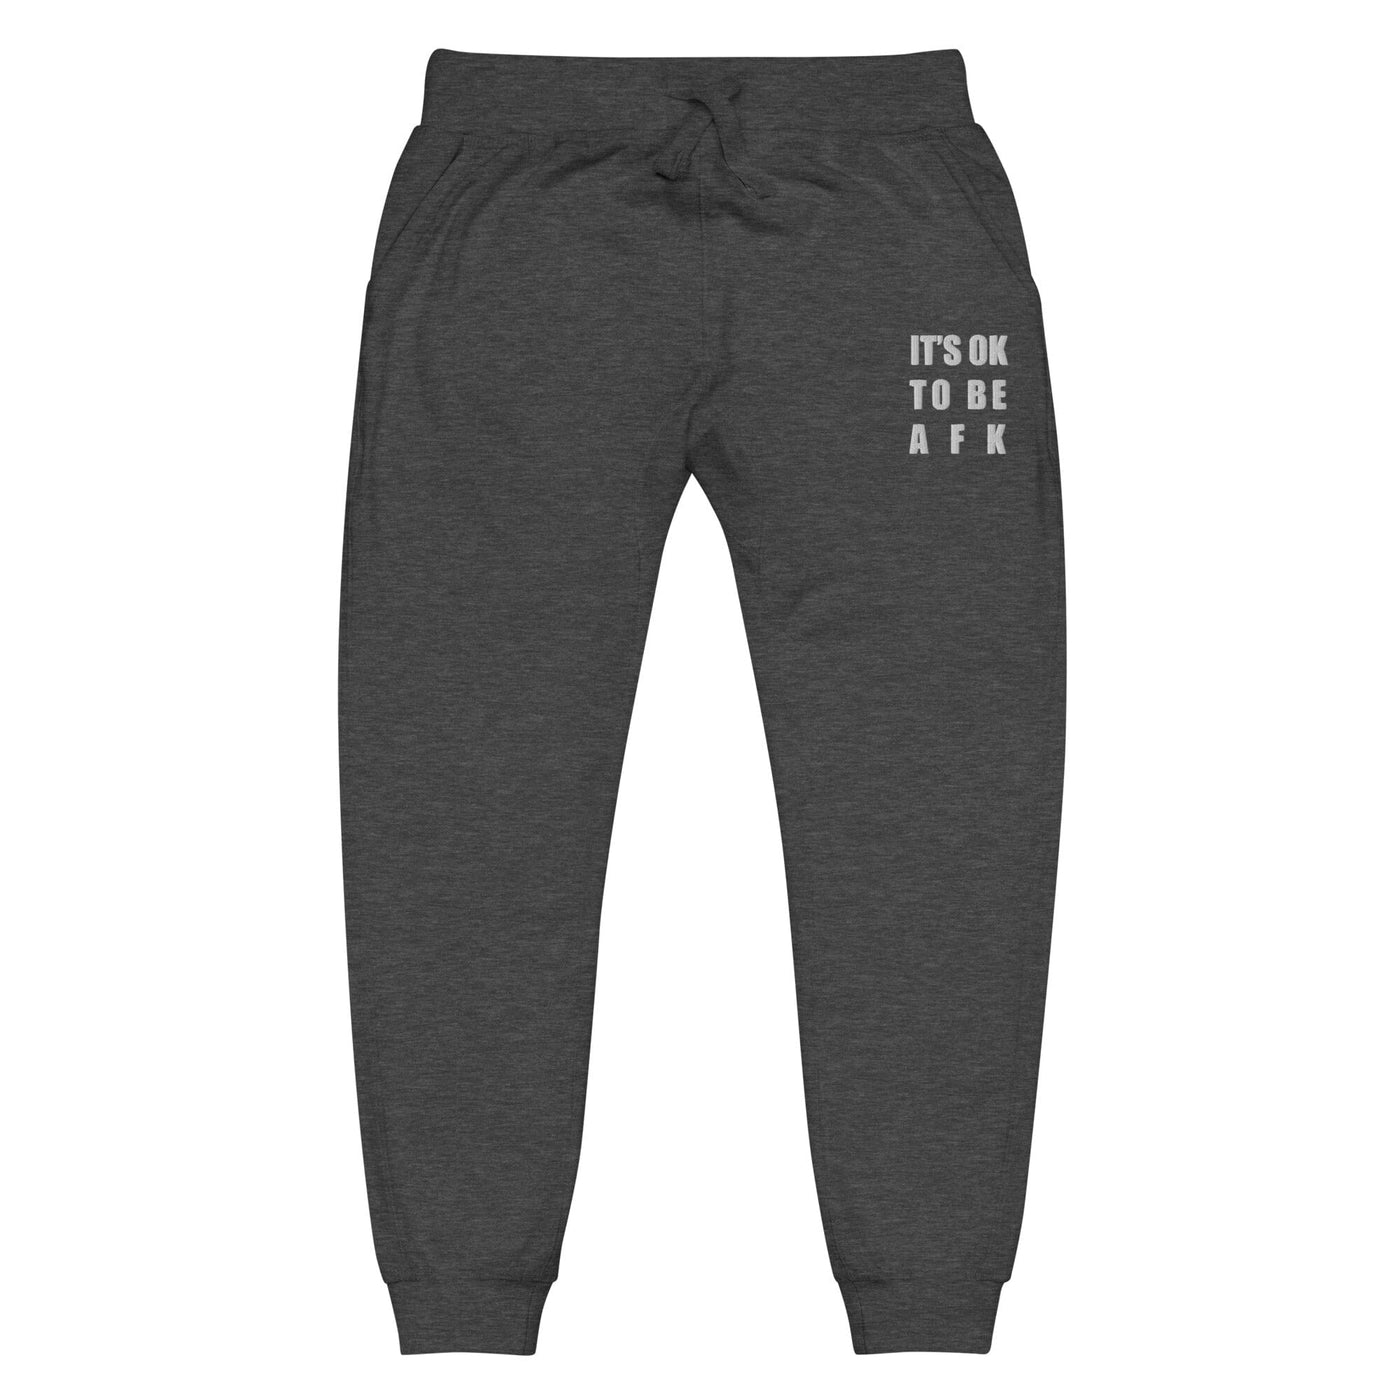 It's Ok to be AFK | Unisex fleece sweatpants | Gamer Affirmations Threads & Thistles Inventory Charcoal Heather XS 